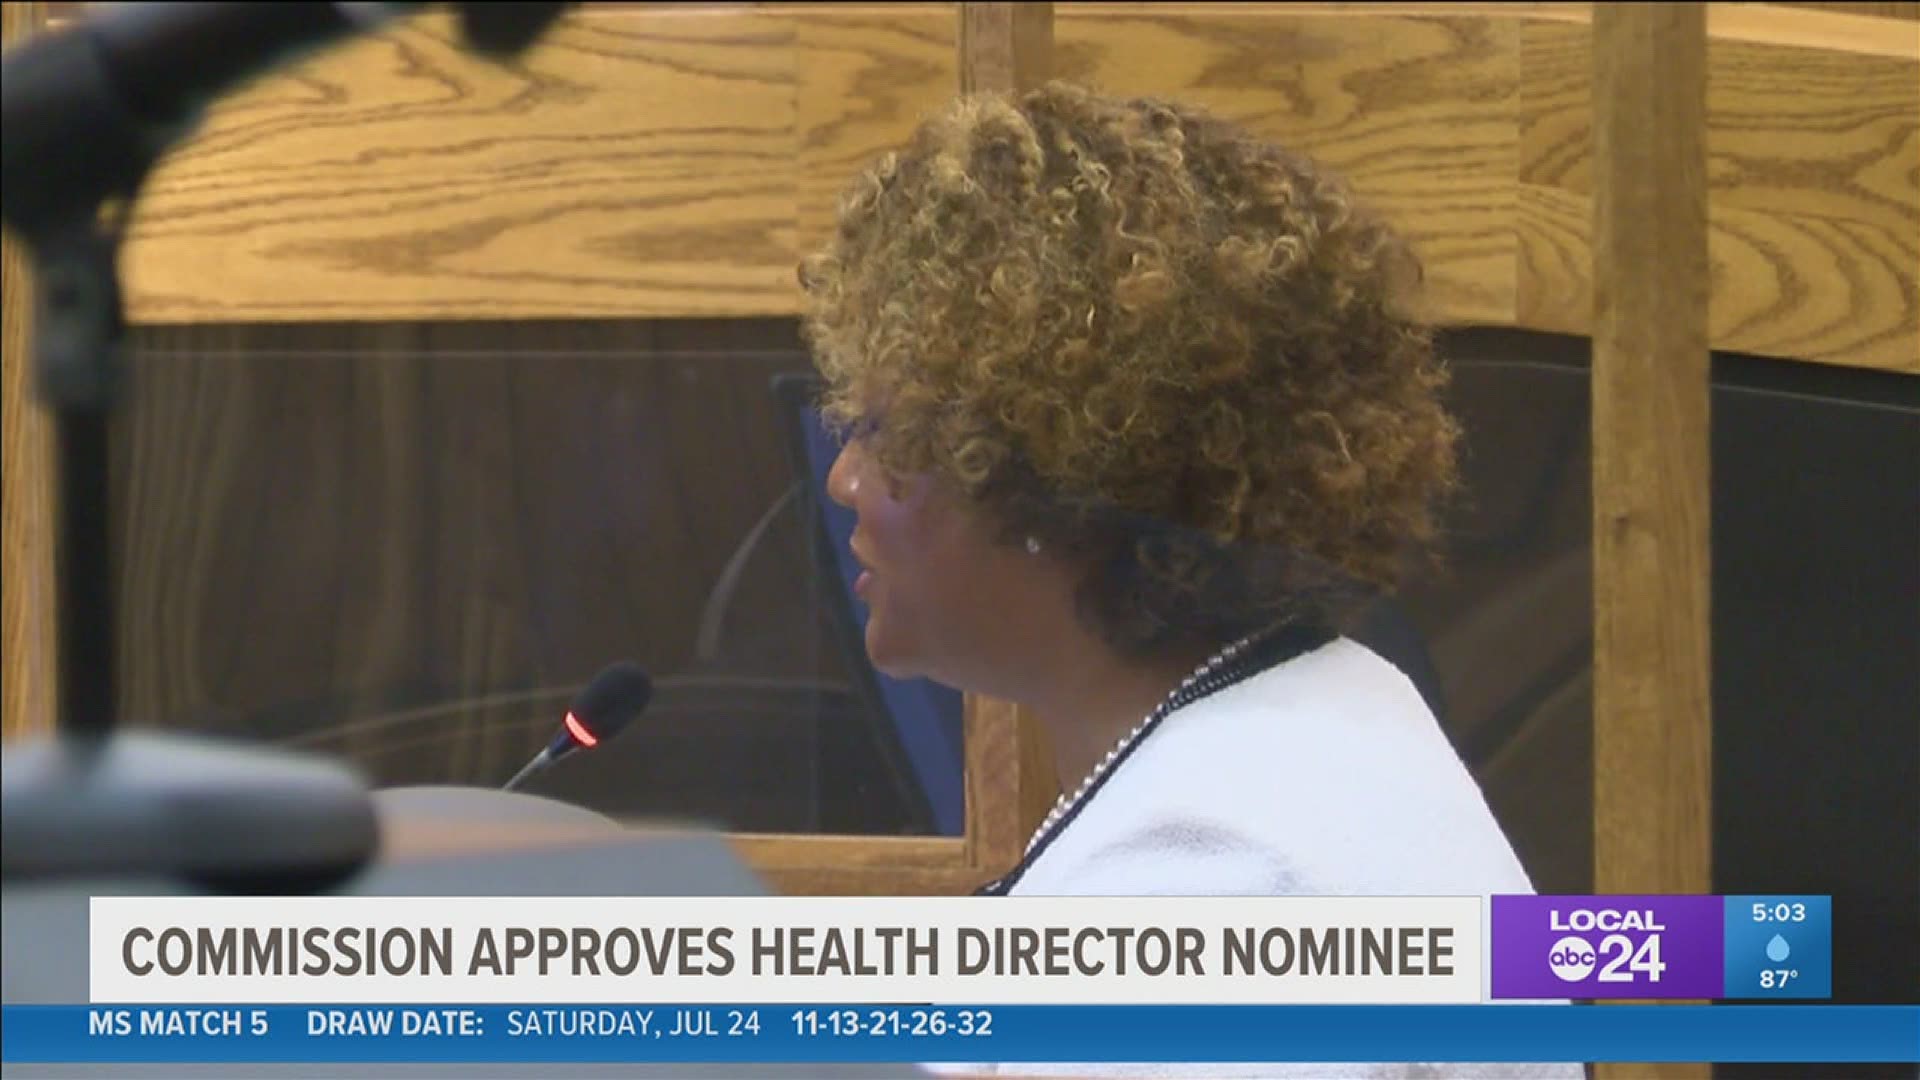 The Shelby County Commission unanimously approved her appointment.